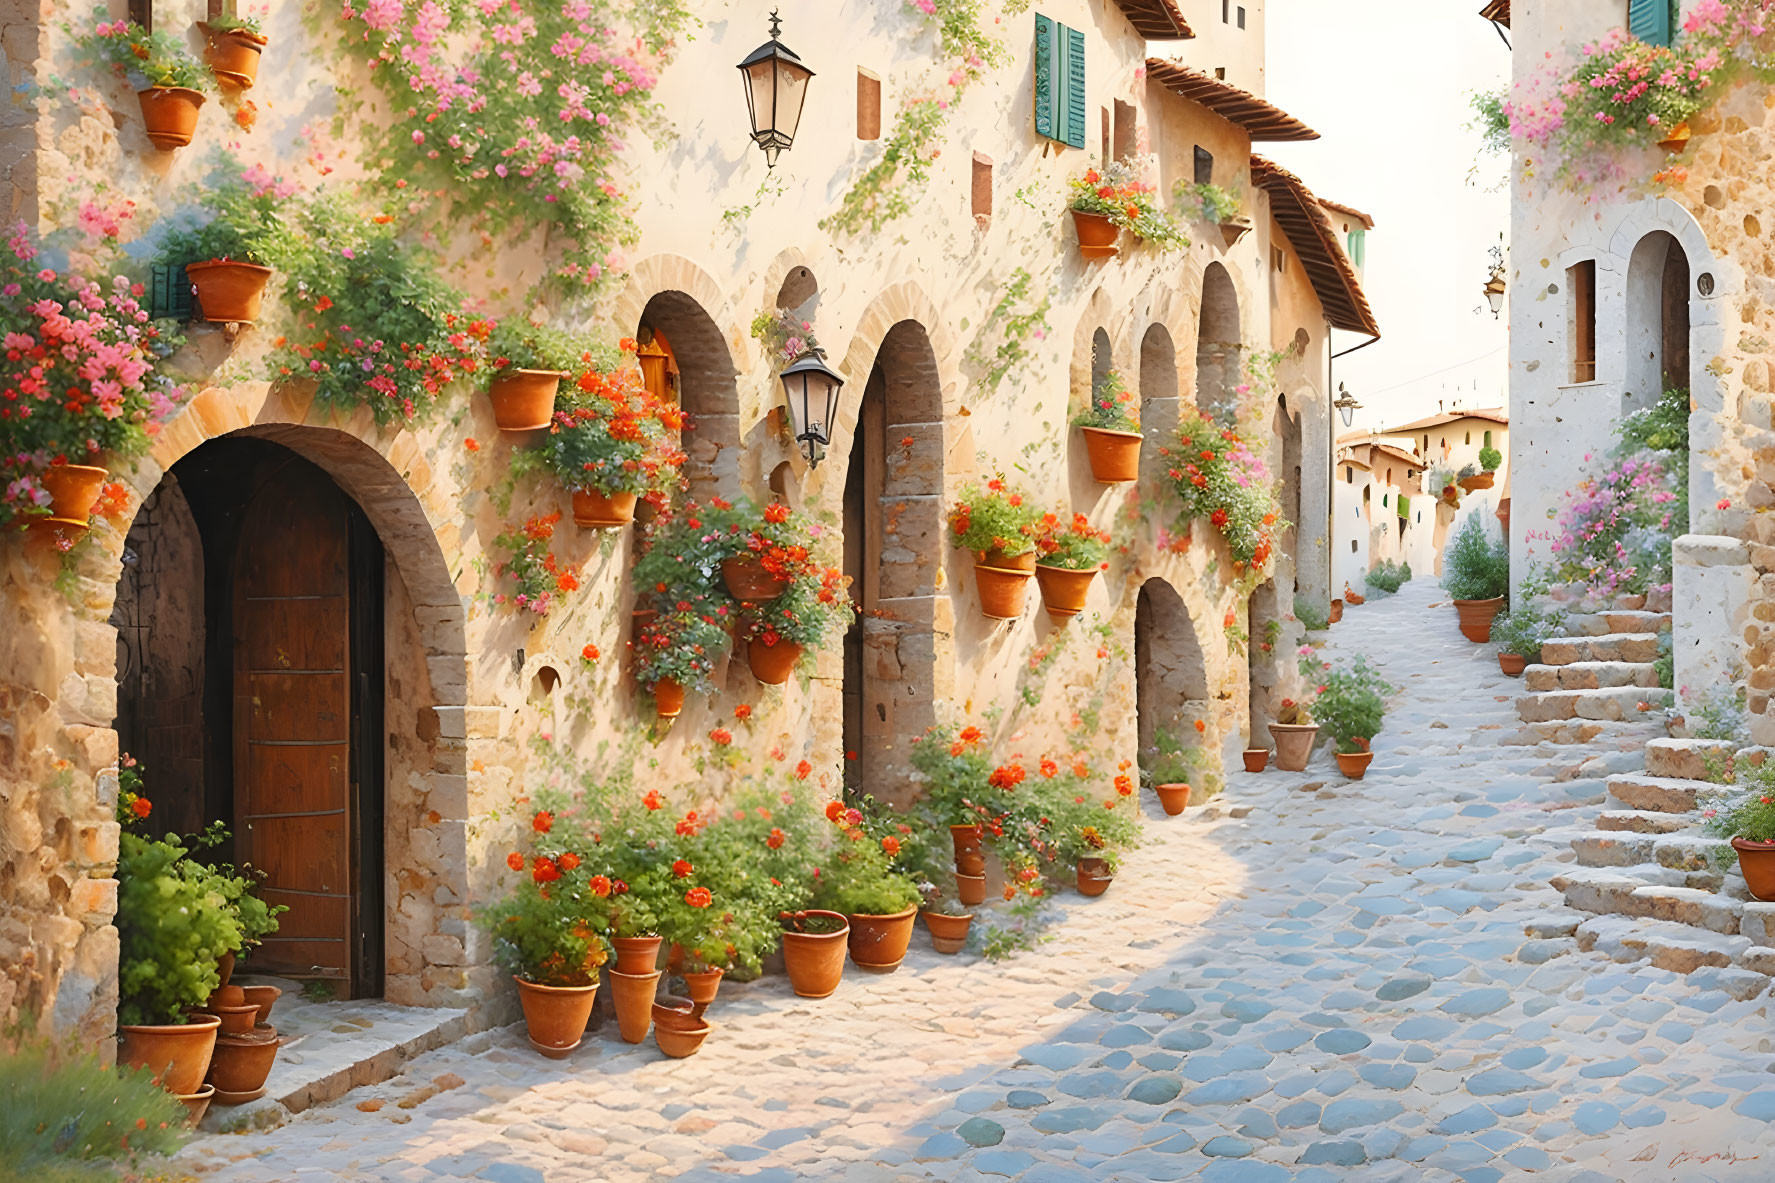 Cobblestone street with blooming flower pots and rustic building façade